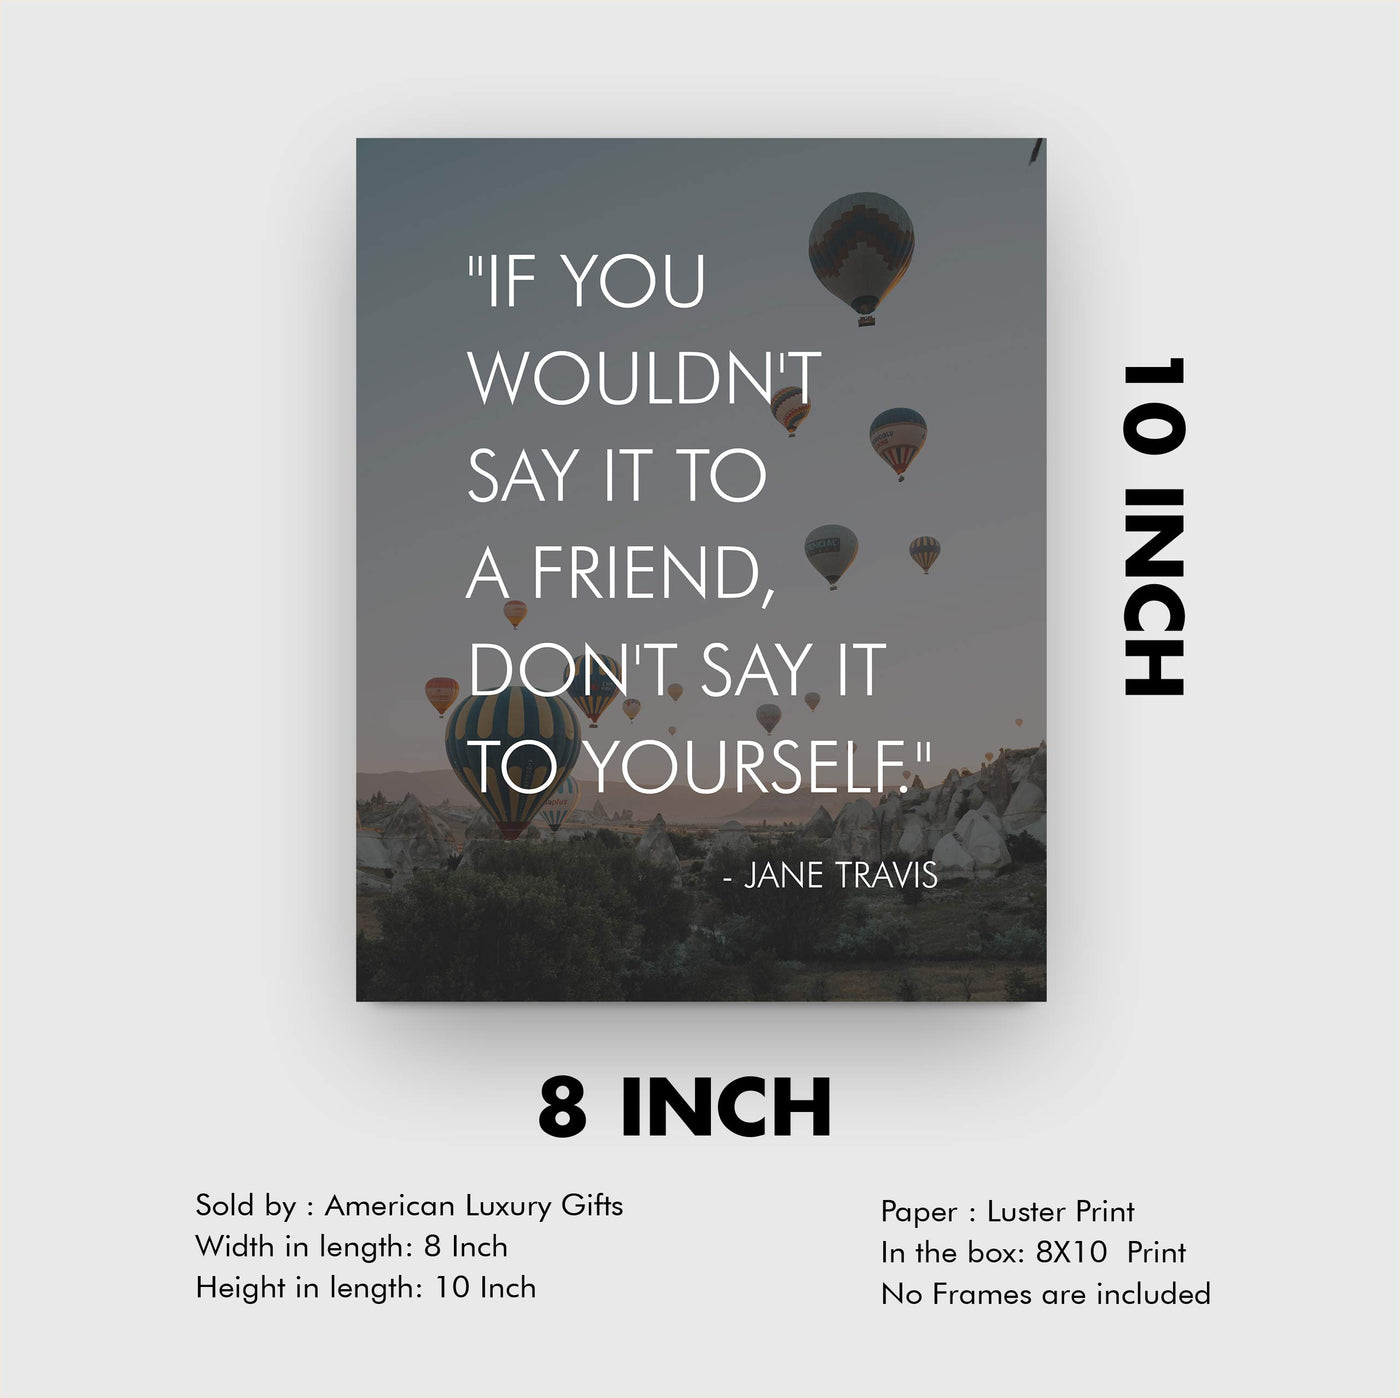 If You Wouldn't Say It to a Friend, Don't Say It to Yourself Inspirational Quotes Wall Art -8 x 10" Modern Typographic Photo Print w/Hot Air Balloons-Ready to Frame. Home-Office-School-Dorm Decor.